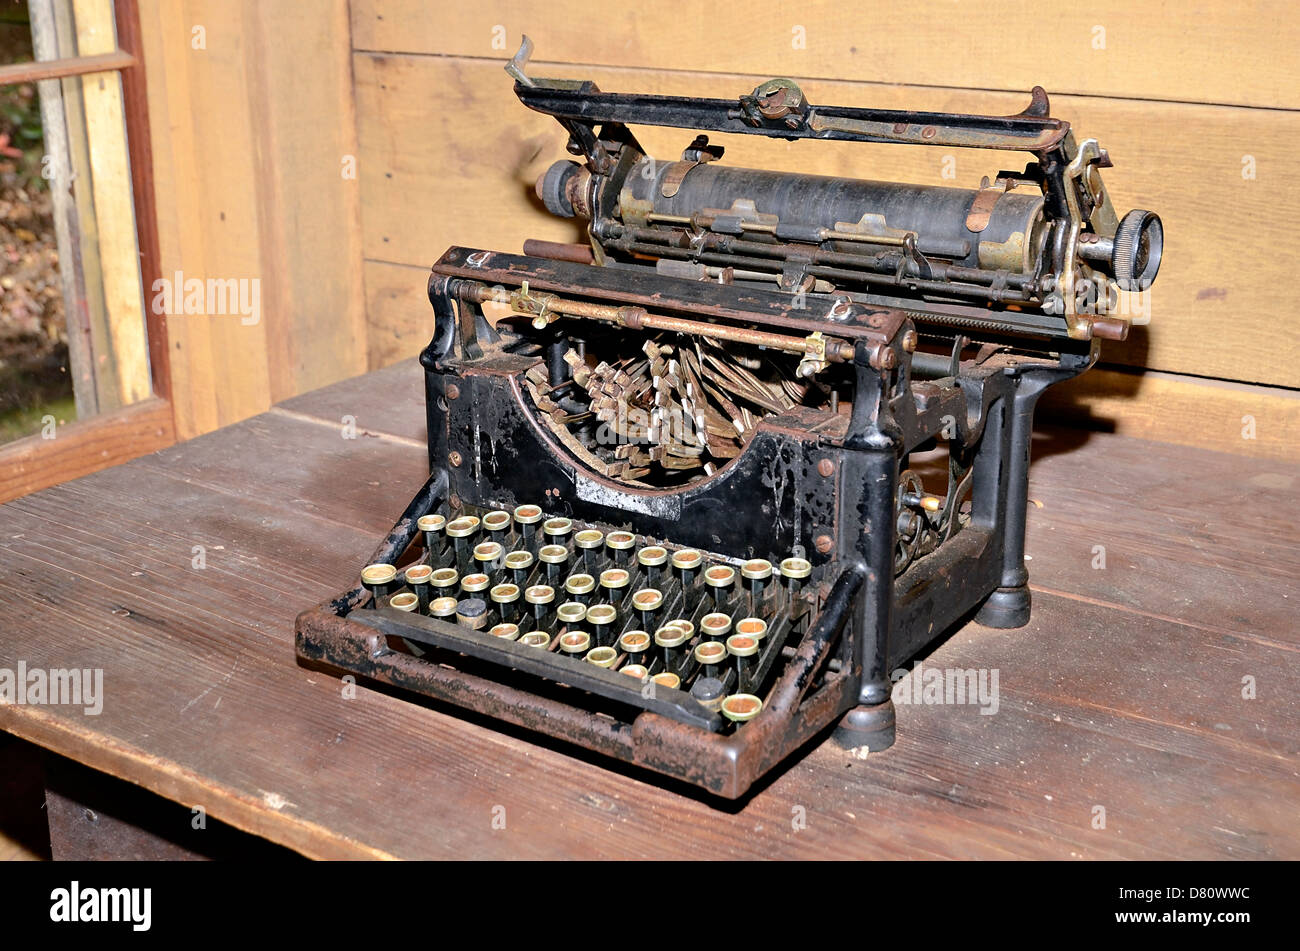 An old typewriter on display in a vintage setting. Stock Photo